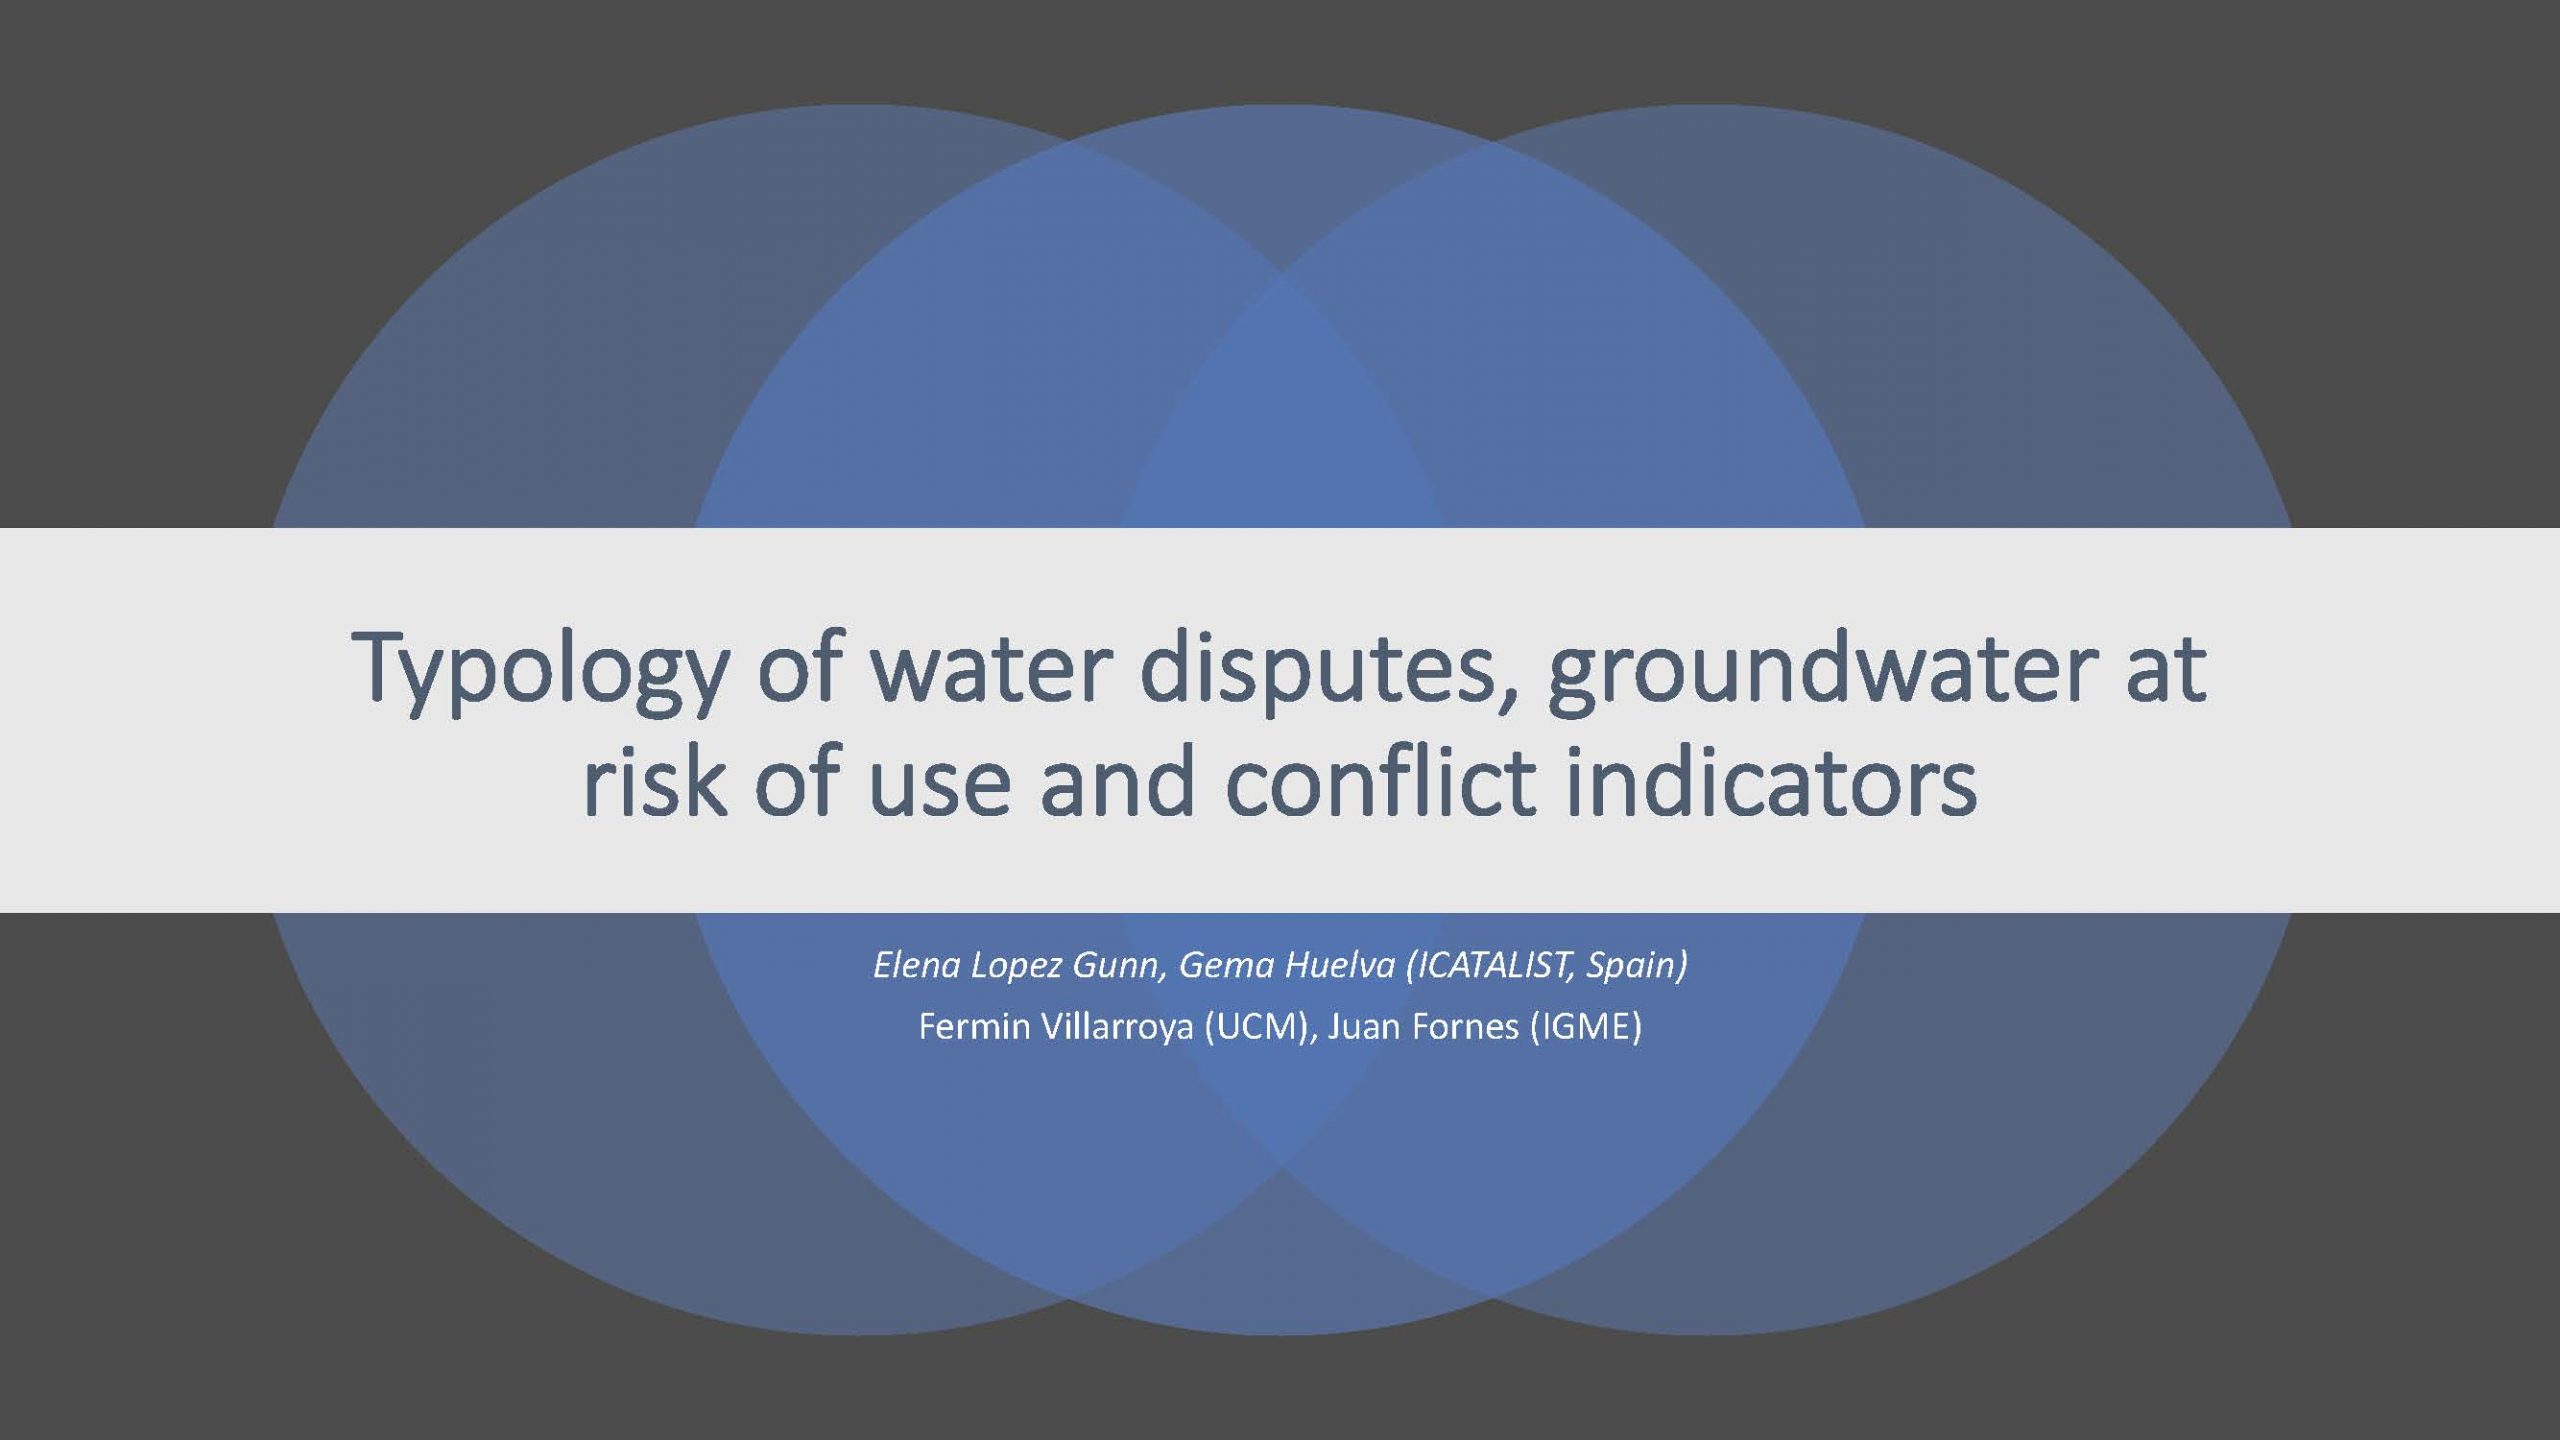 13 Lopez_Gunn et al Typology of water disputes, groundwater at risk_Page_01